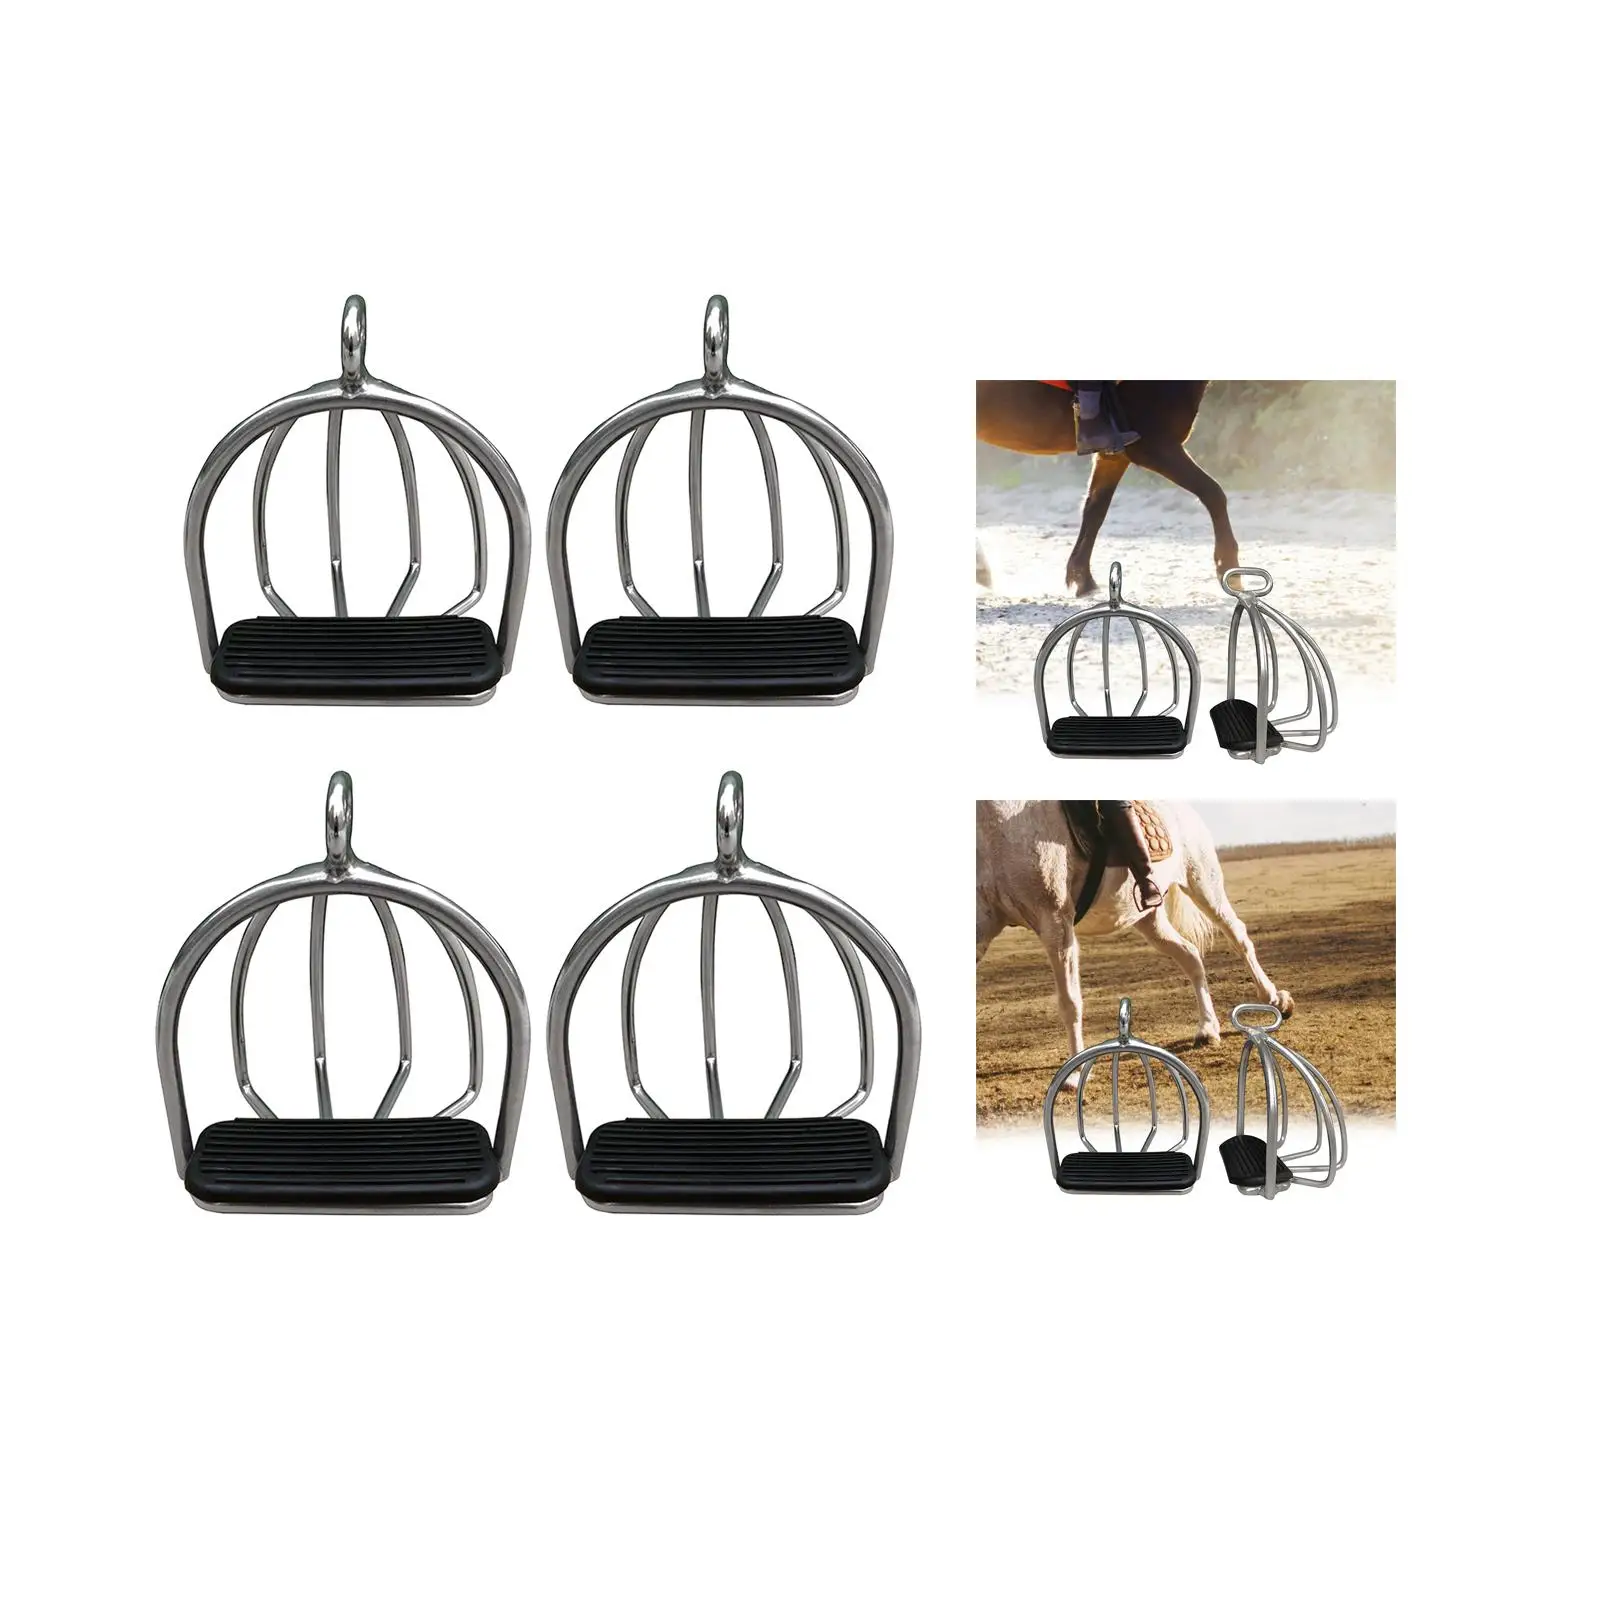 1Pair Cage Horse Riding Stirrups Steel High Strength Rubber Pad Lightweight for Safety Horse Riding Outdoor Sports Supplies Kids